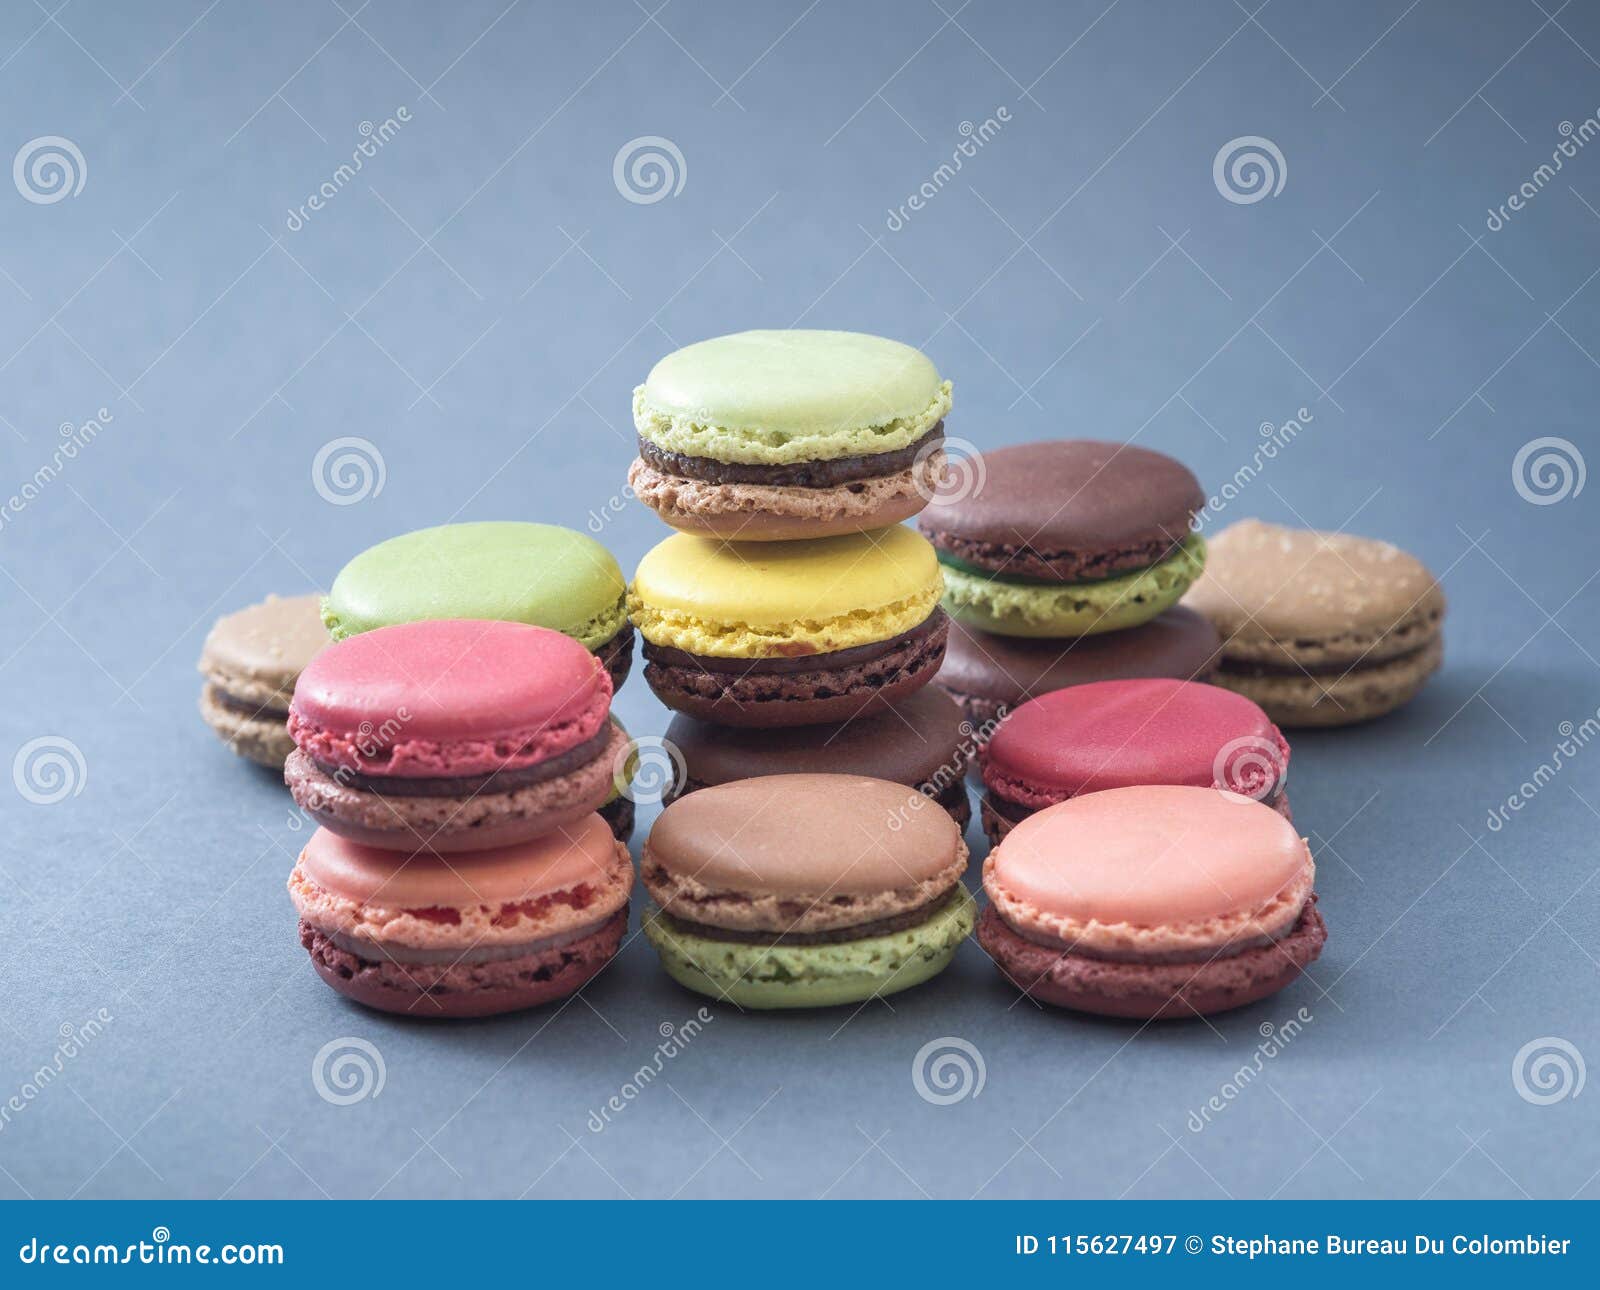 French Dessert Macarons Color and Taste Variations. Stock Image - Image ...